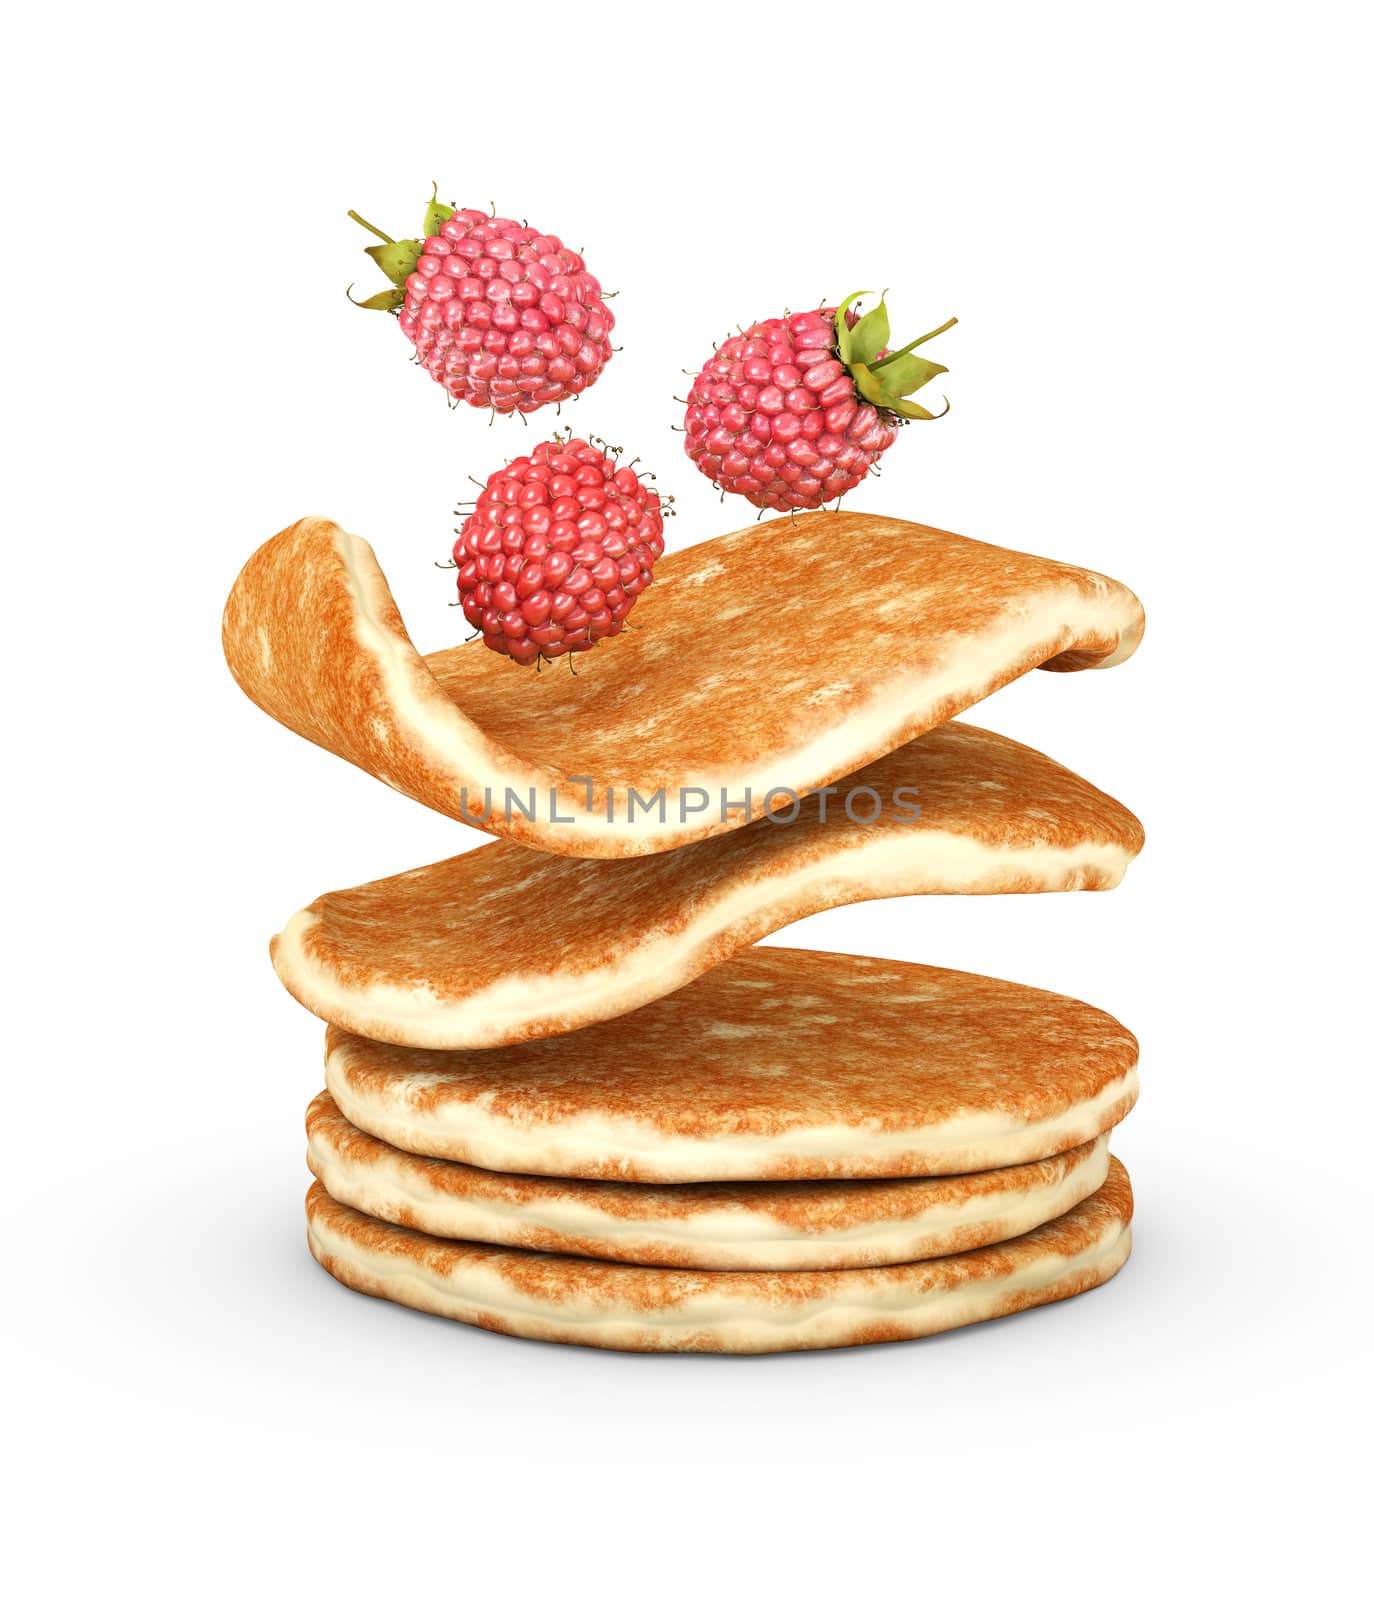 3d Illustration of pancake with fresh raspberries isolated on white background.